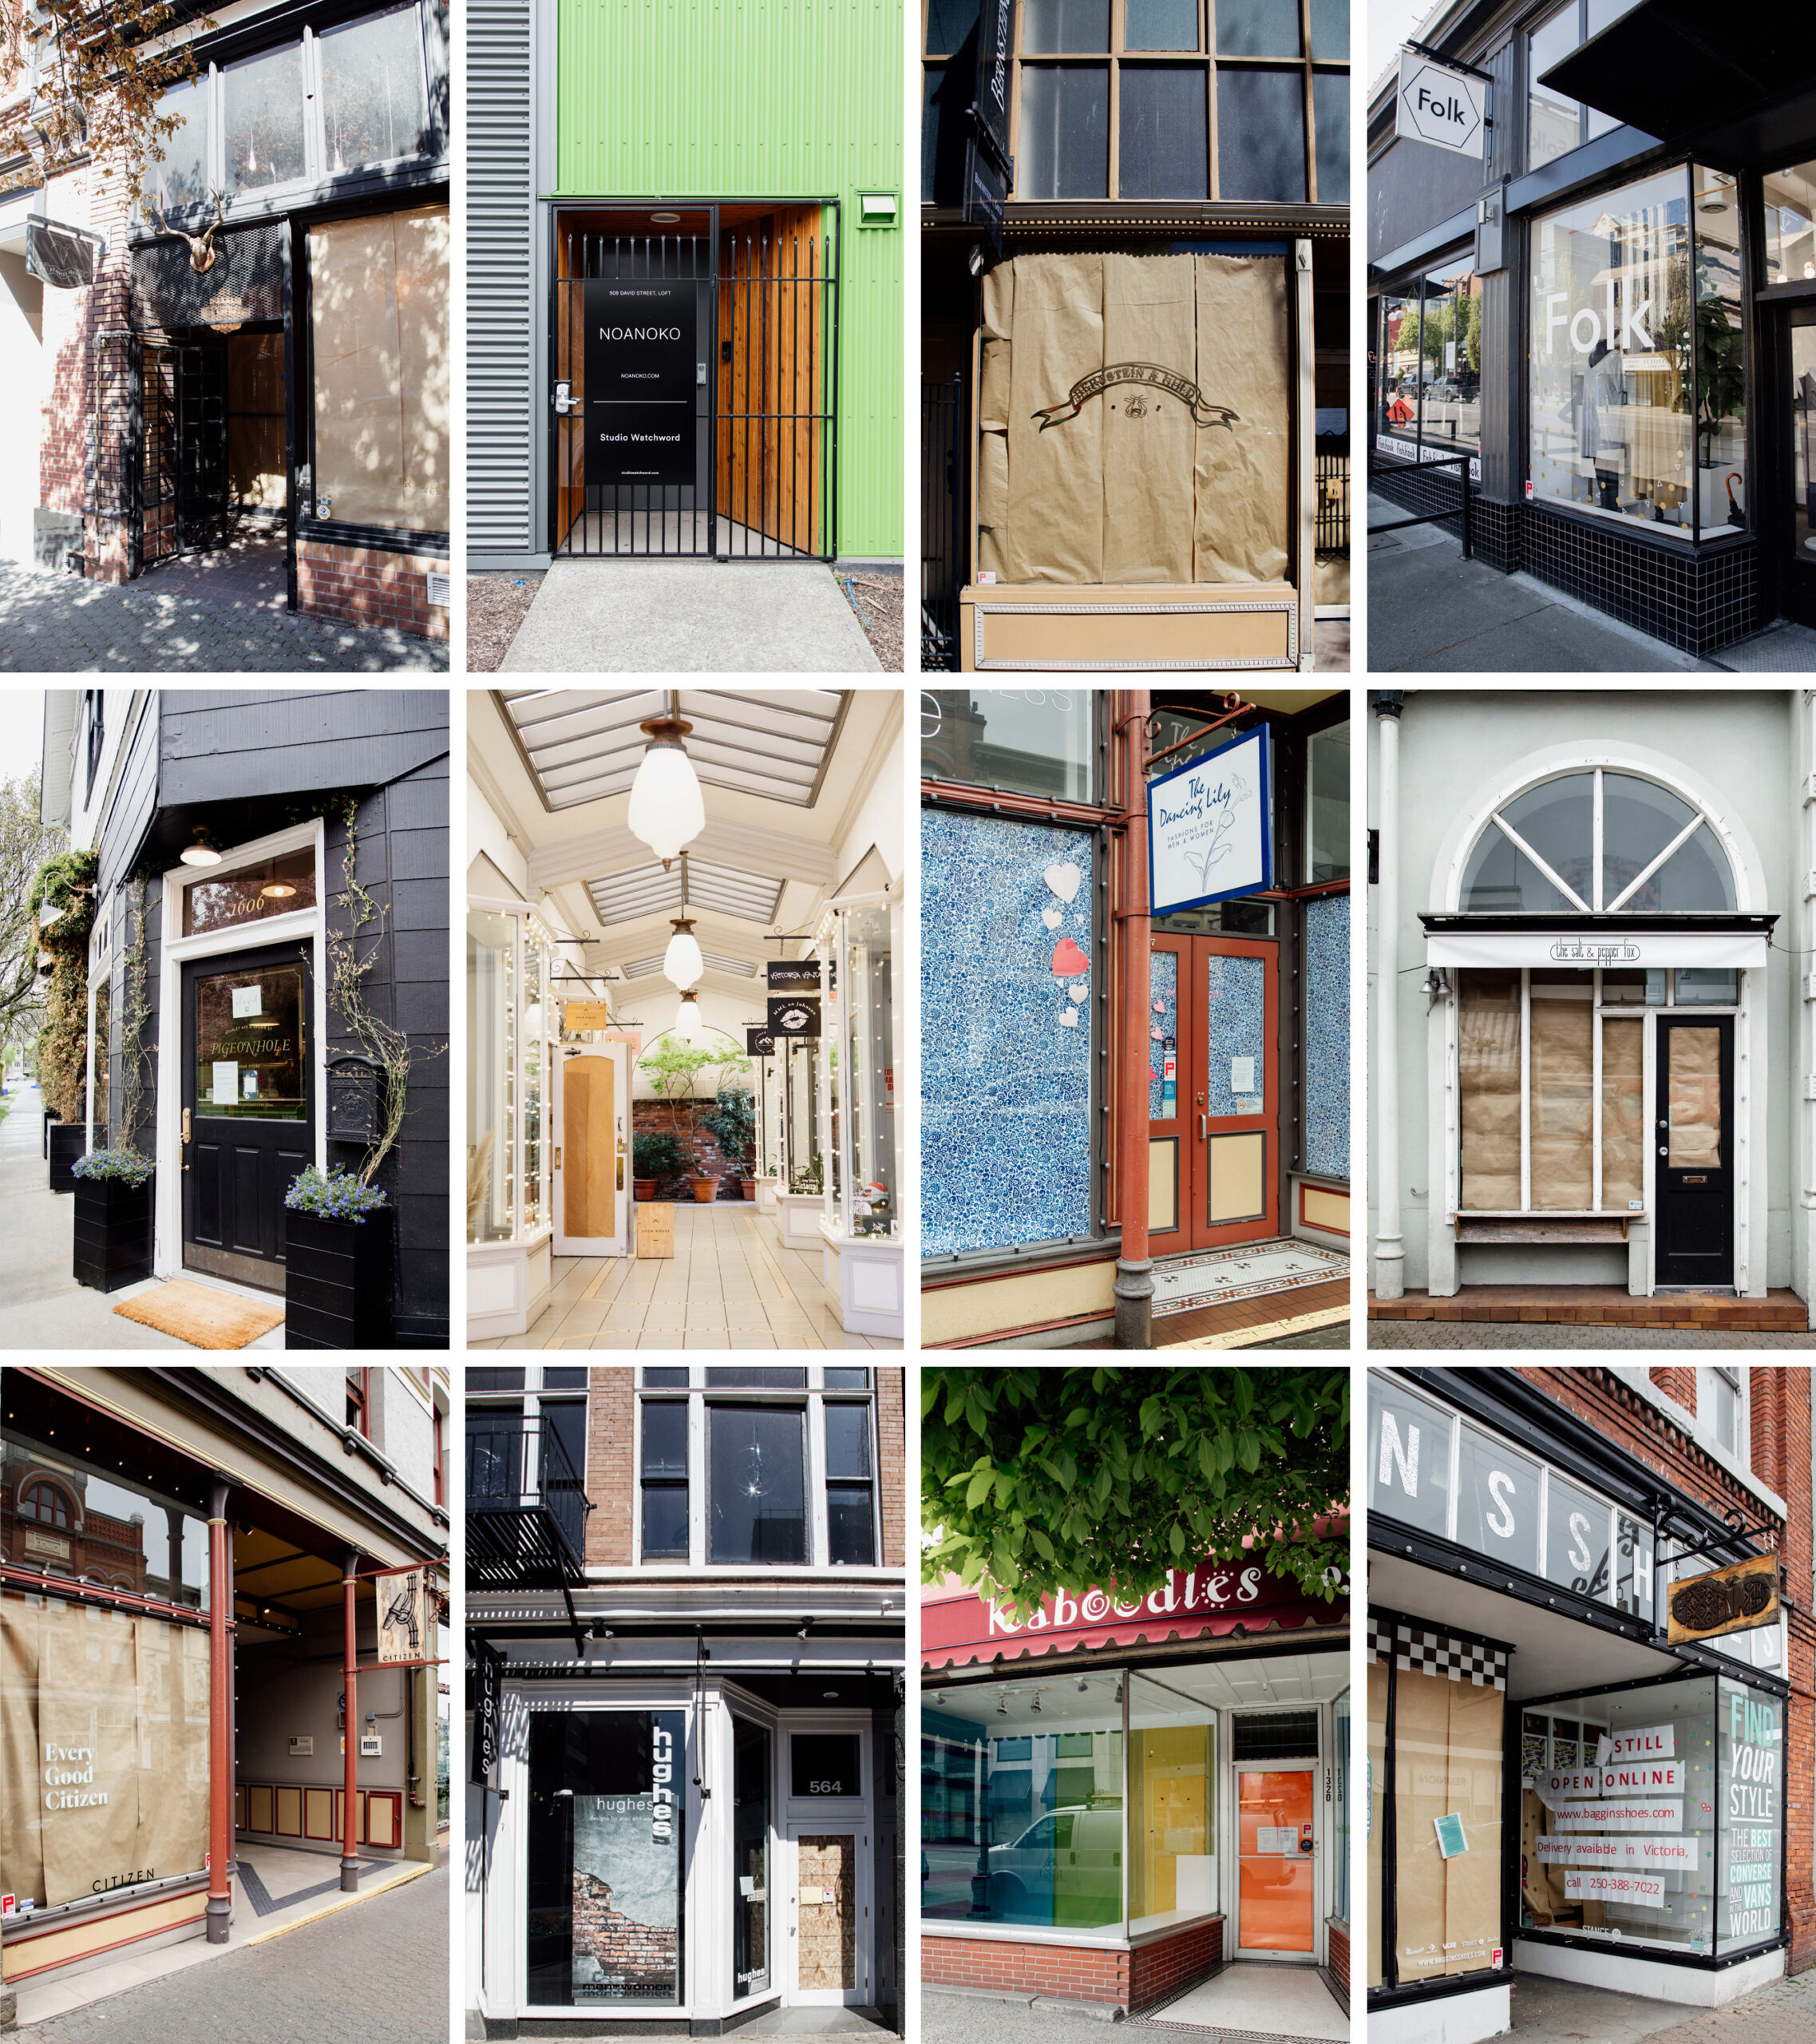 A mosaic of storefronts with paper on the windows during COVID-19 lockdown.